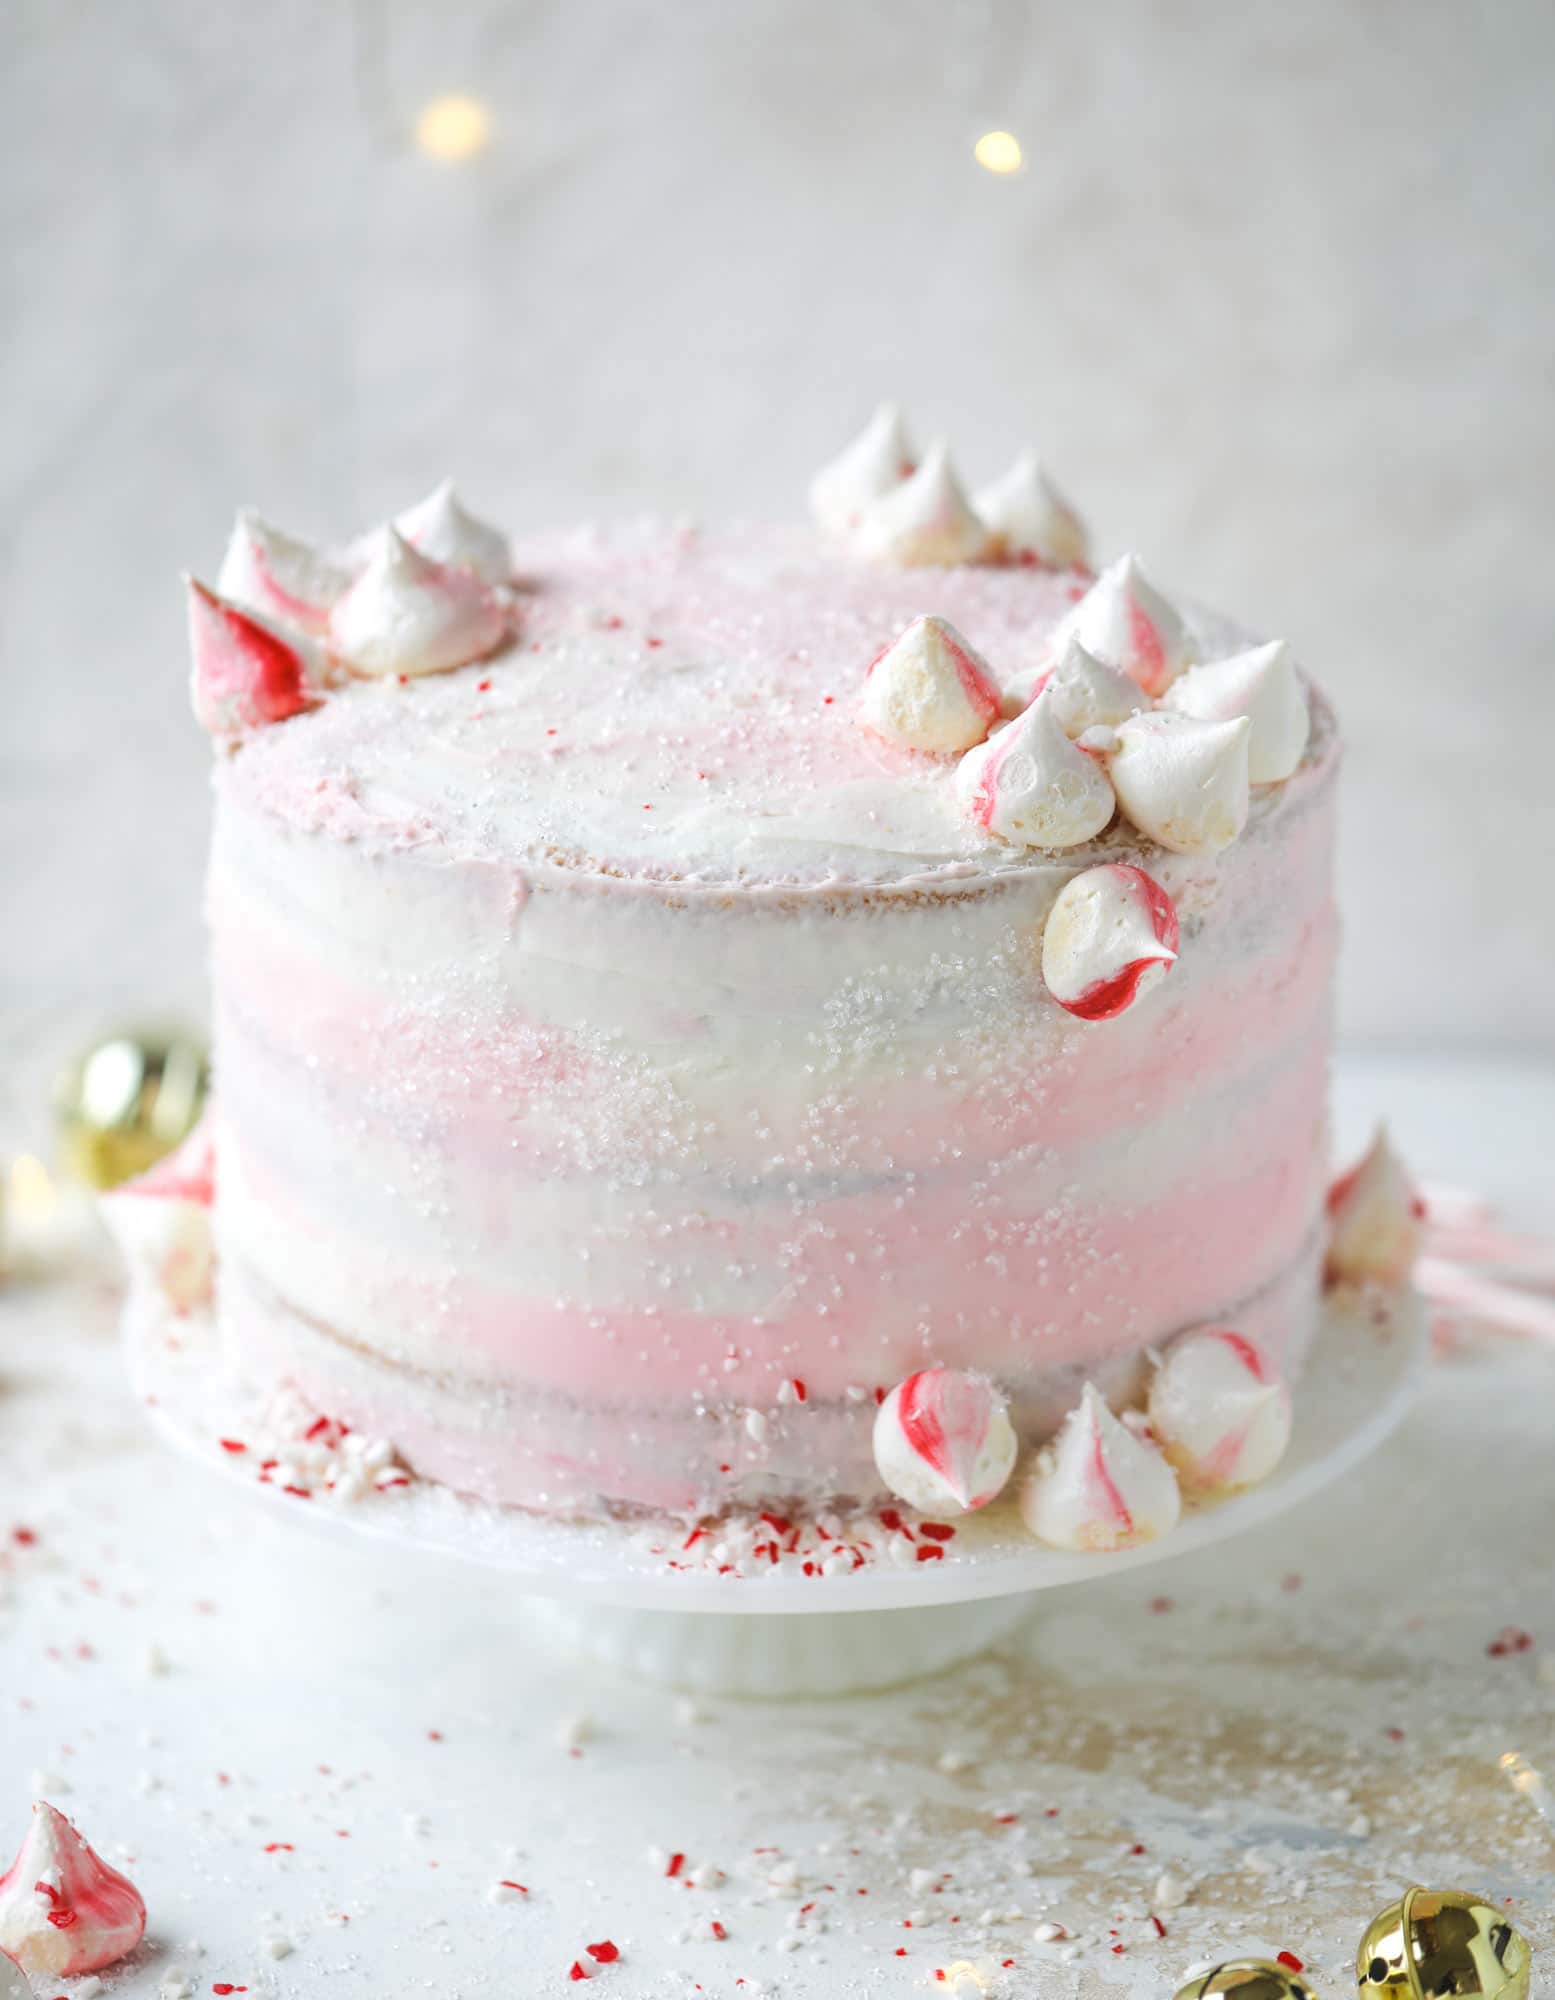 This pink peppermint cake is festive and delicious for the holidays! Layers of vanilla cake frosting with peppermint cream cheese frosting, covered in sparkly sugar and peppermint meringues. Couldn't be cuter! I #pinkpeppermint #cake